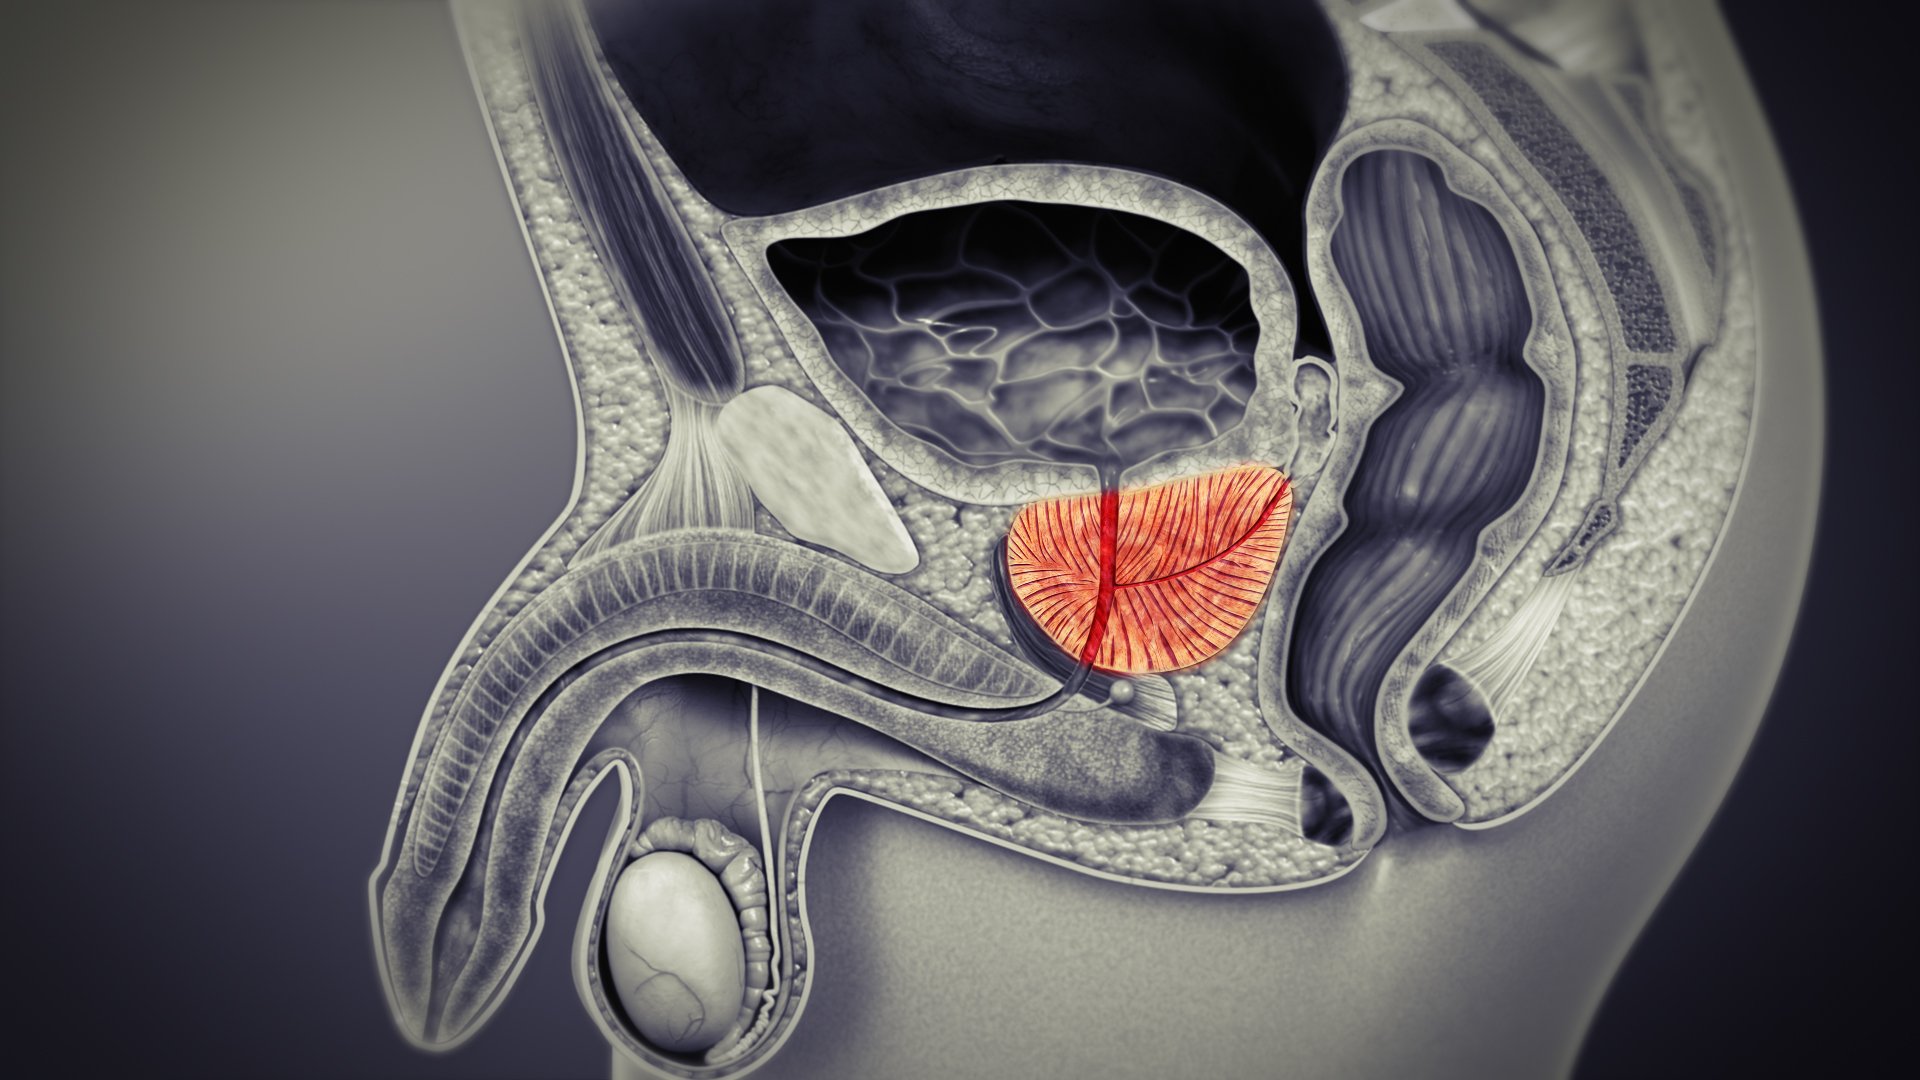 Prostate Glands: Function, Conditions, and Treatments